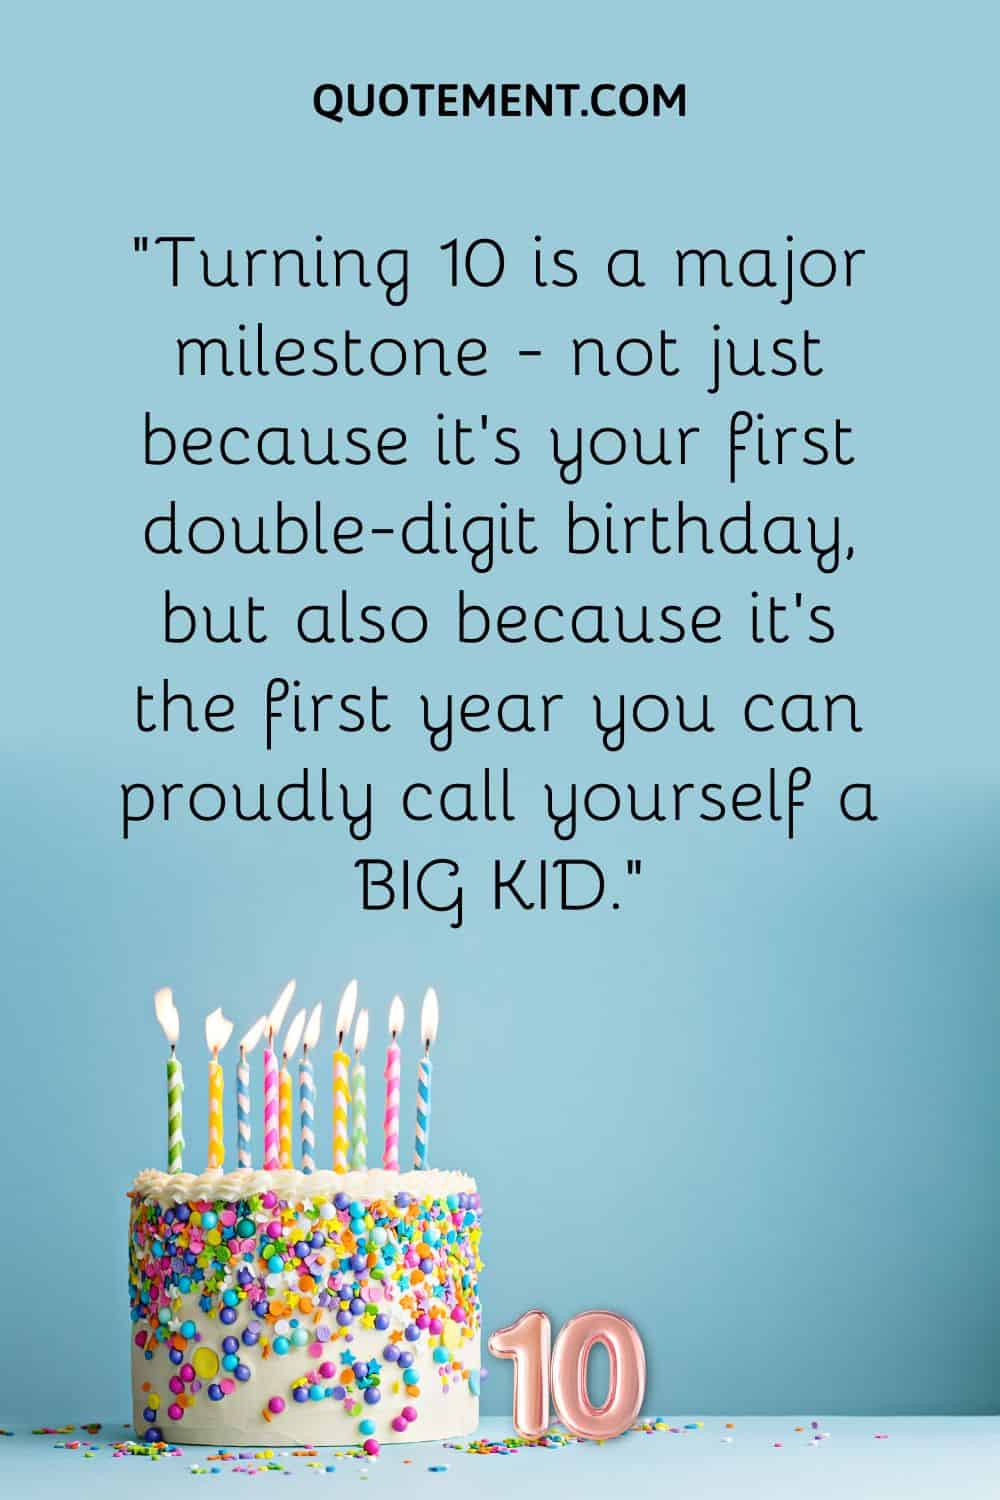 “Turning 10 is a major milestone - not just because it's your first double-digit birthday, but also because it's the first year you can proudly call yourself a BIG KID.”